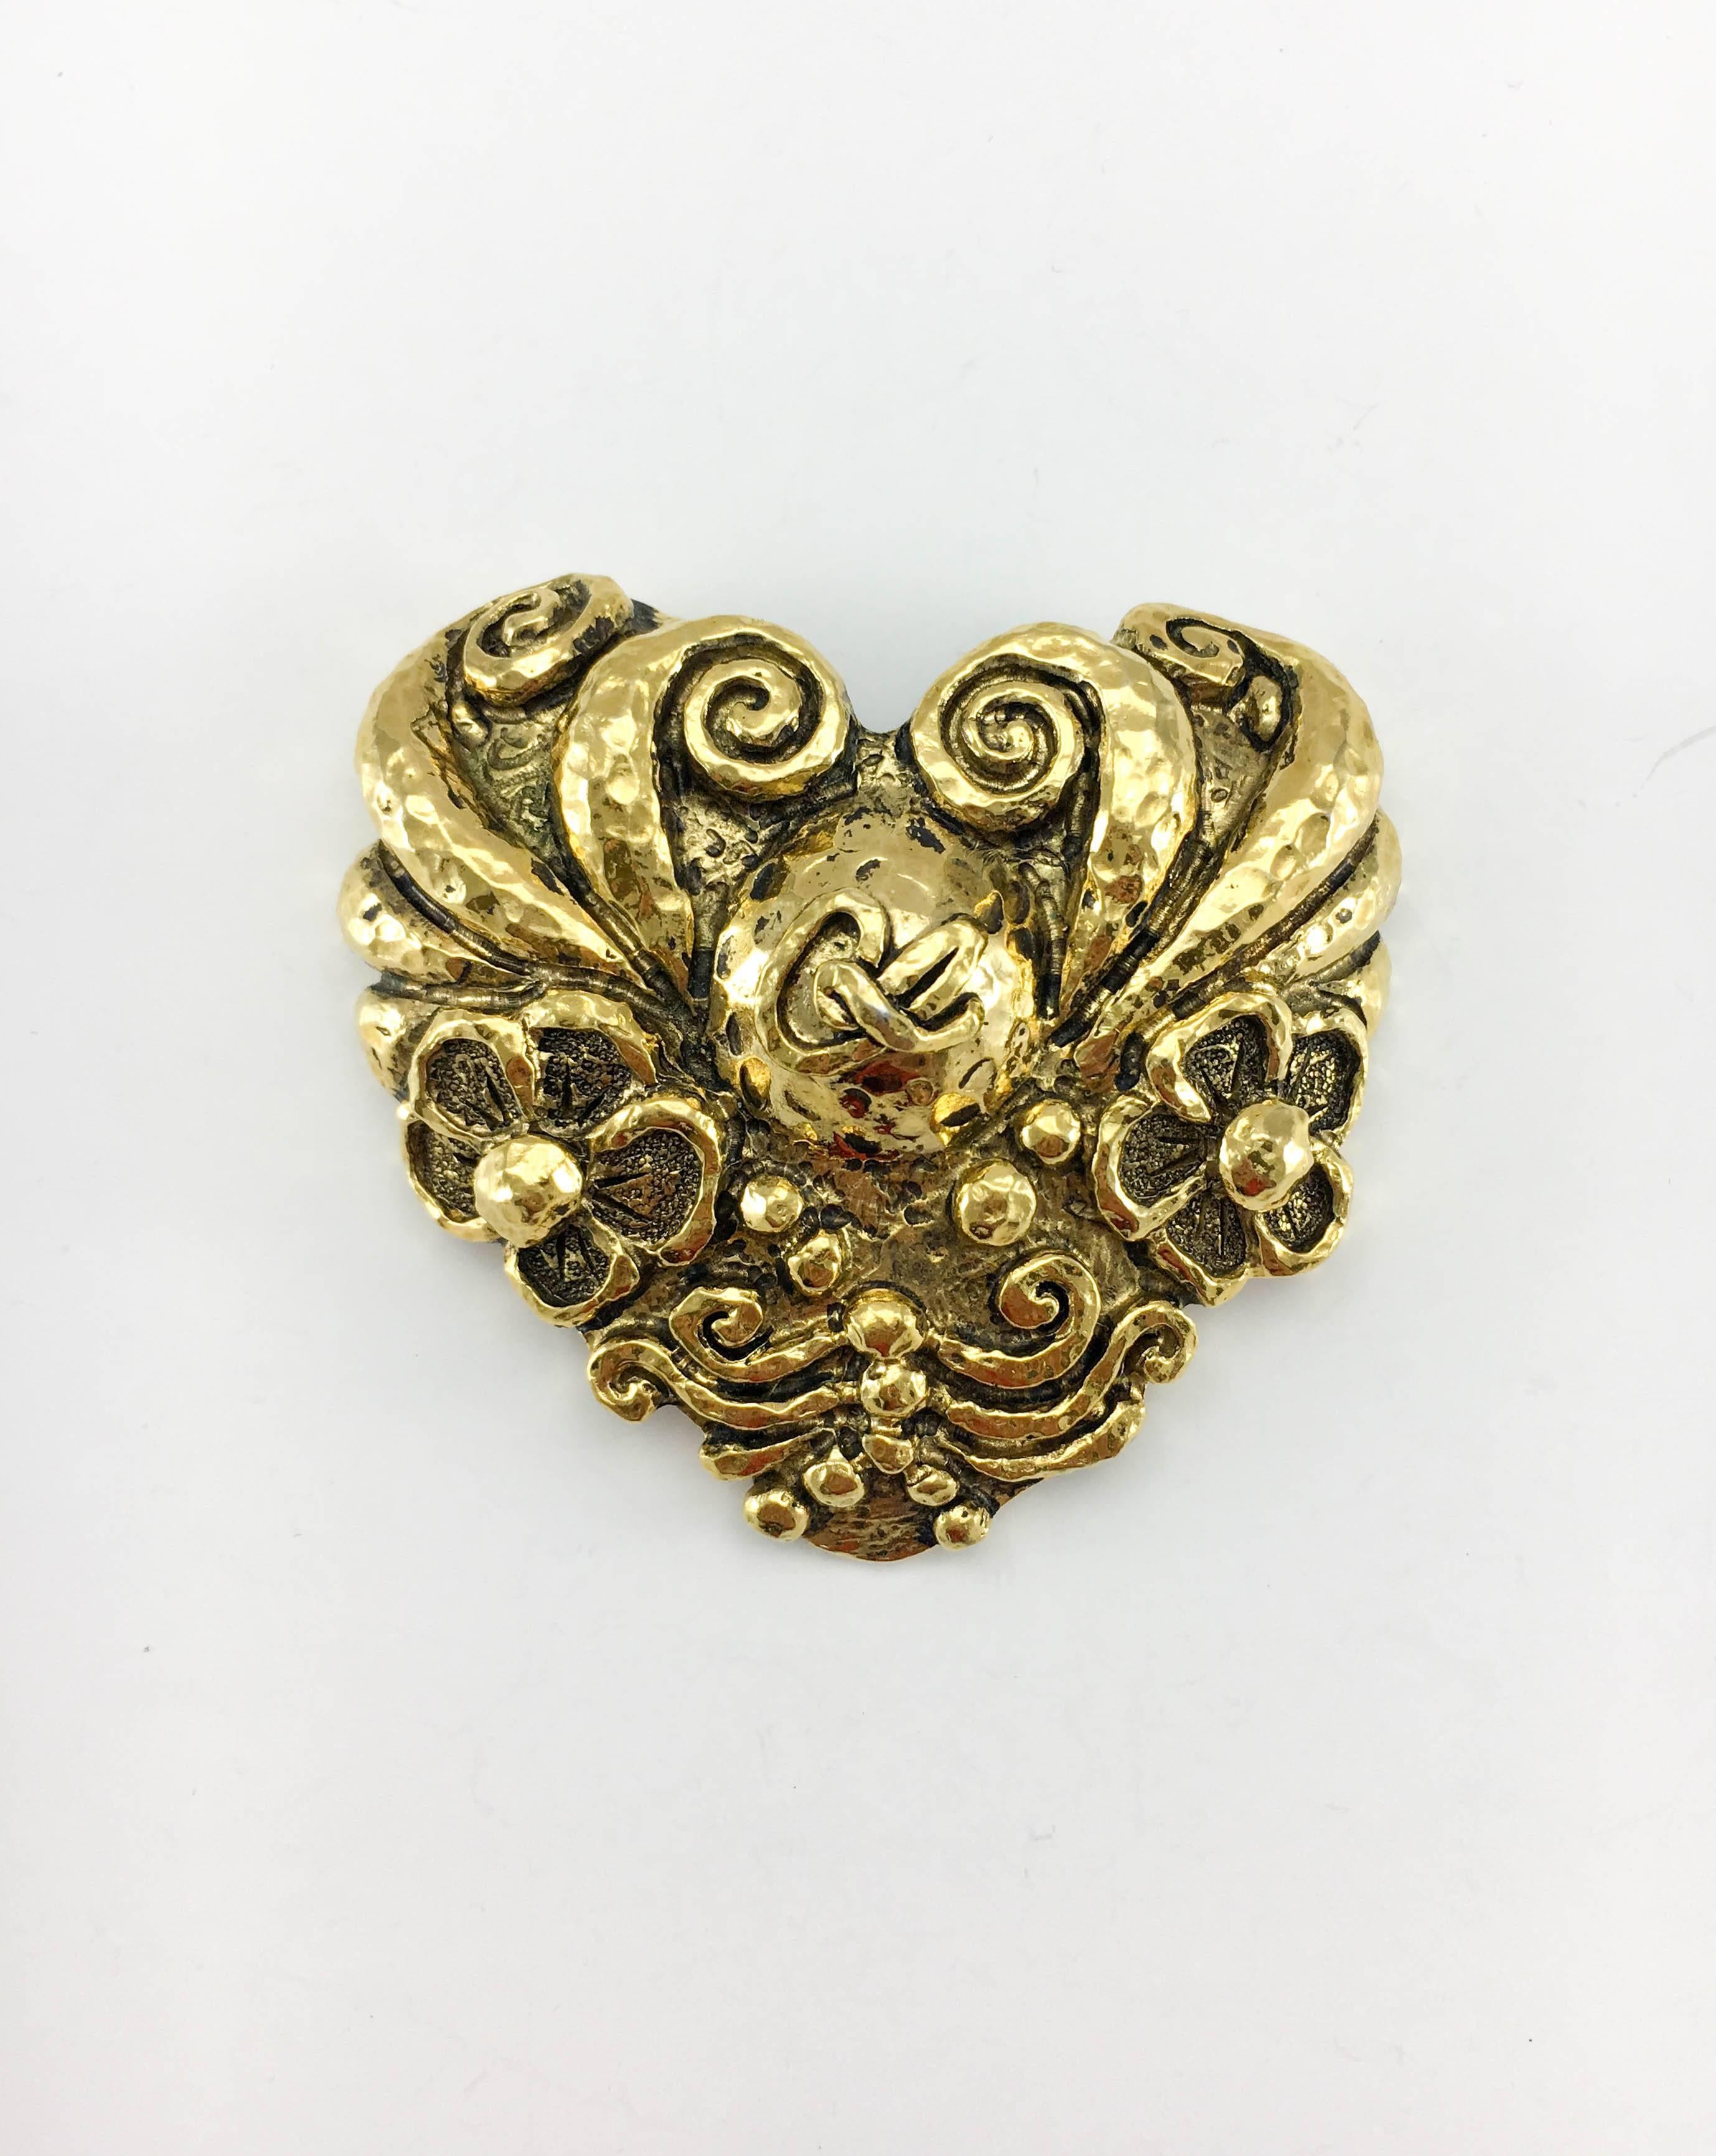 Vintage Christian Lacroix Large Gold-Plated Heart Pin Brooch. This striking brooch by Christian Lacroix dates back from the 1980’s. Crafted in gold-plated metal, this large heart-shaped brooch features the Lacroix logo in the centre surrounded by